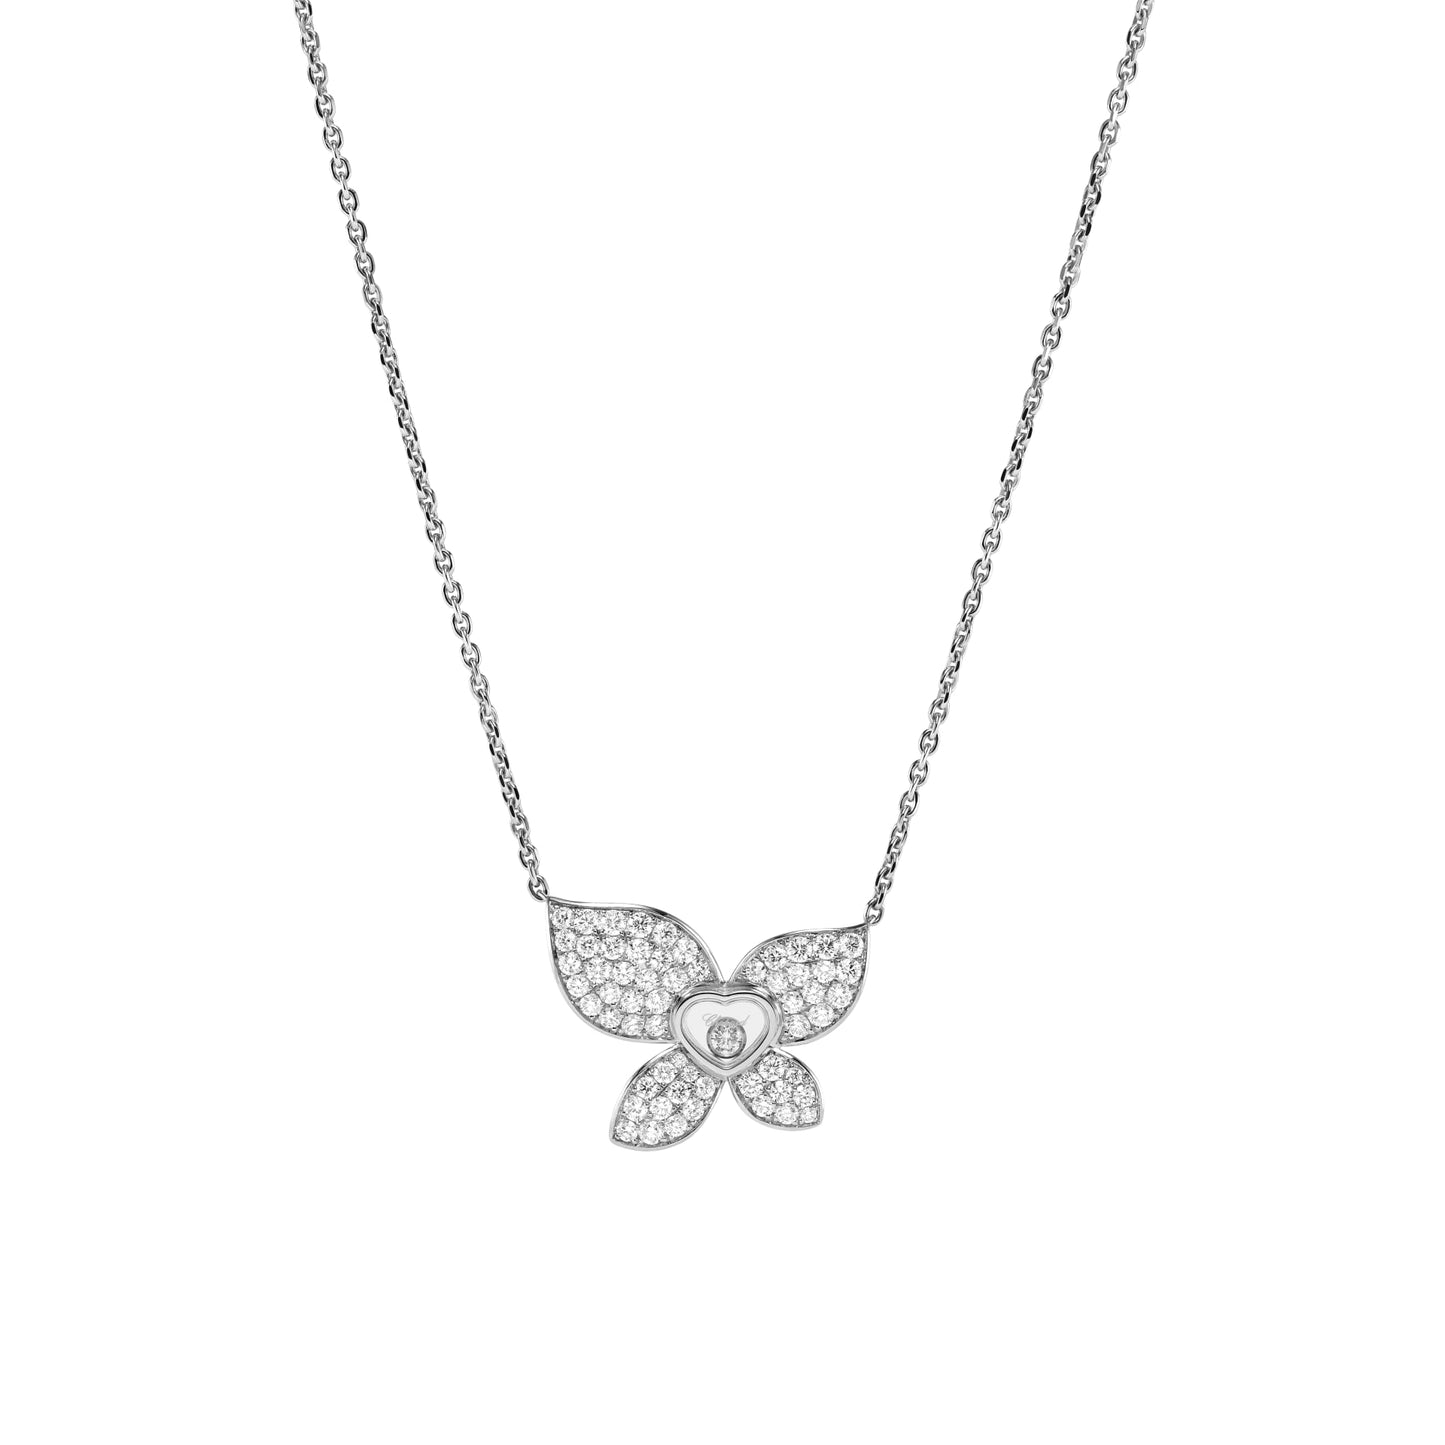 HAPPY BUTTERFLY X MARIAH CAREY NECKLACE, ETHICAL WHITE GOLD, DIAMONDS 818536-1001